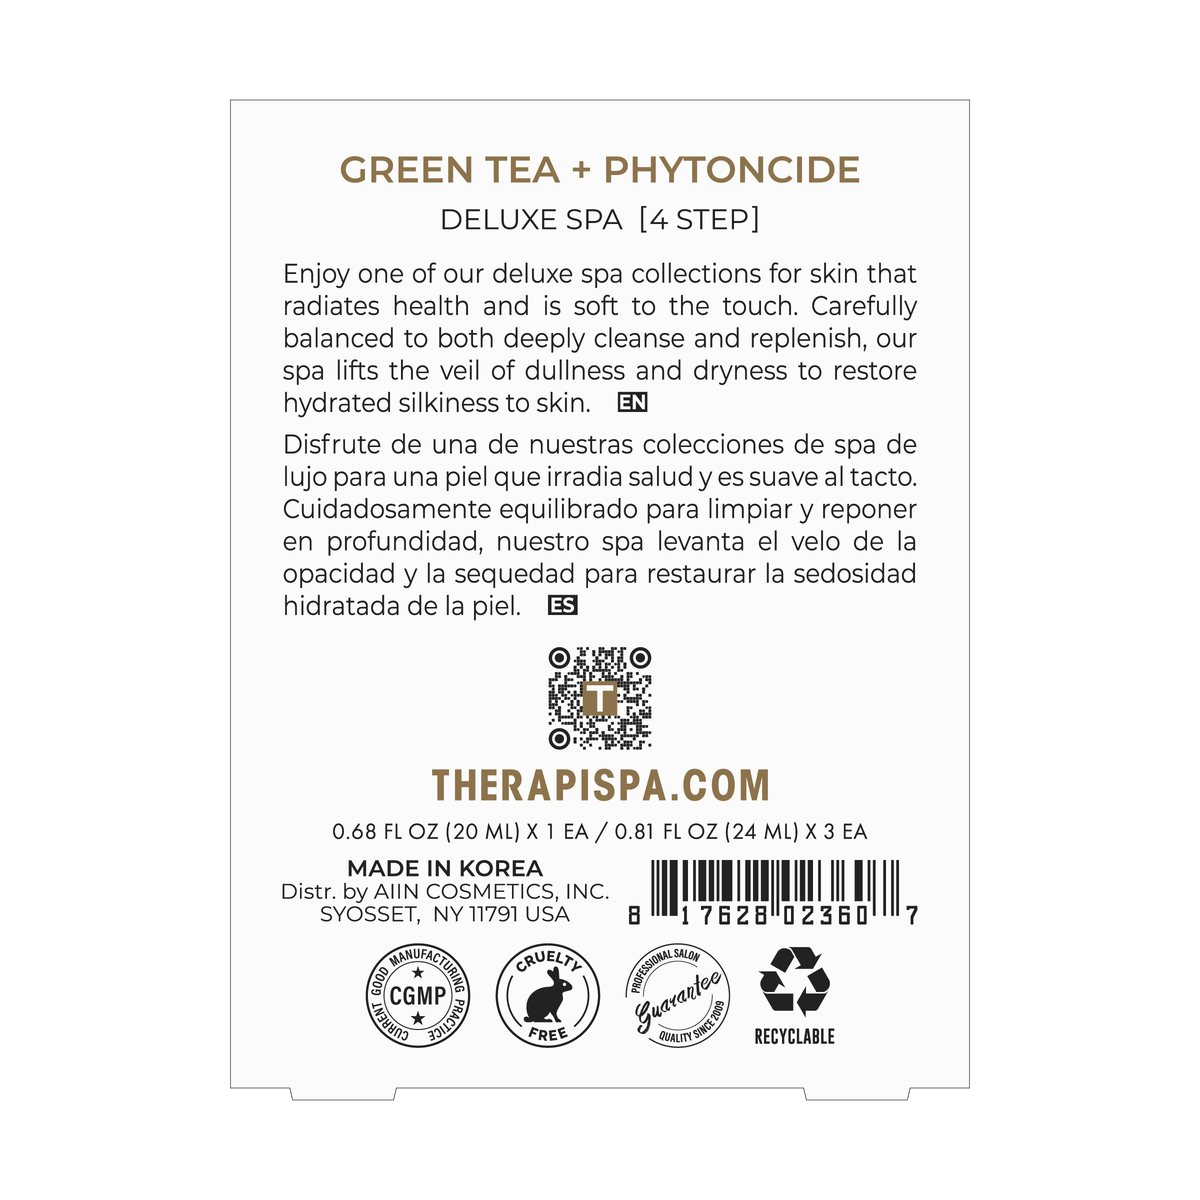 Deluxe Spa Kit / Green Tea + Phytoncide